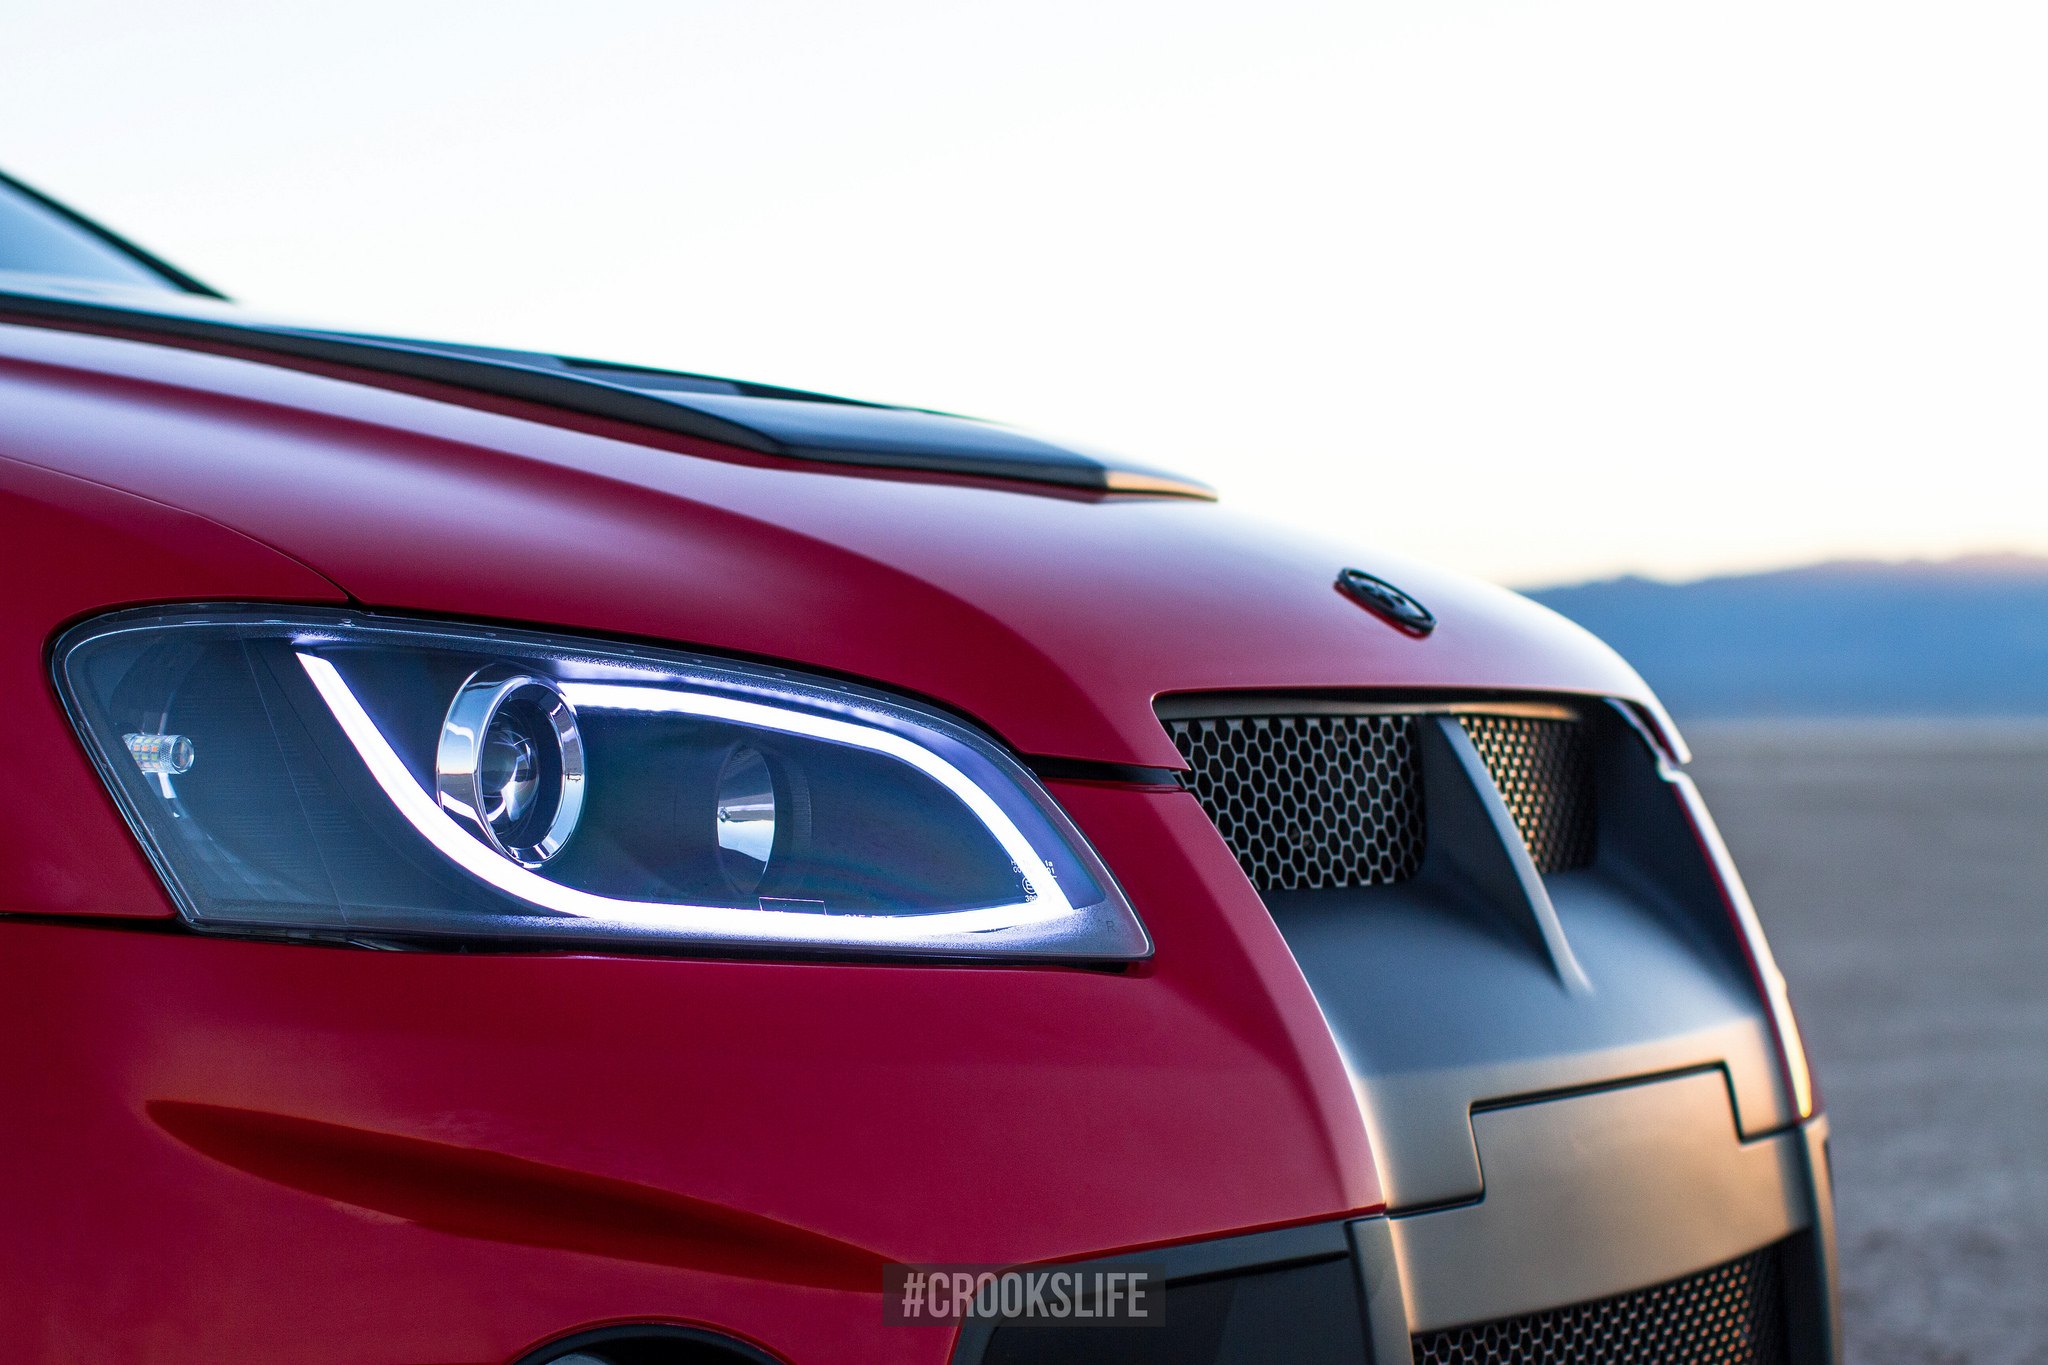 Aftermarket Headlights with LED-Bars on Red Pontiac G8 - Photo by Jimmy Crook